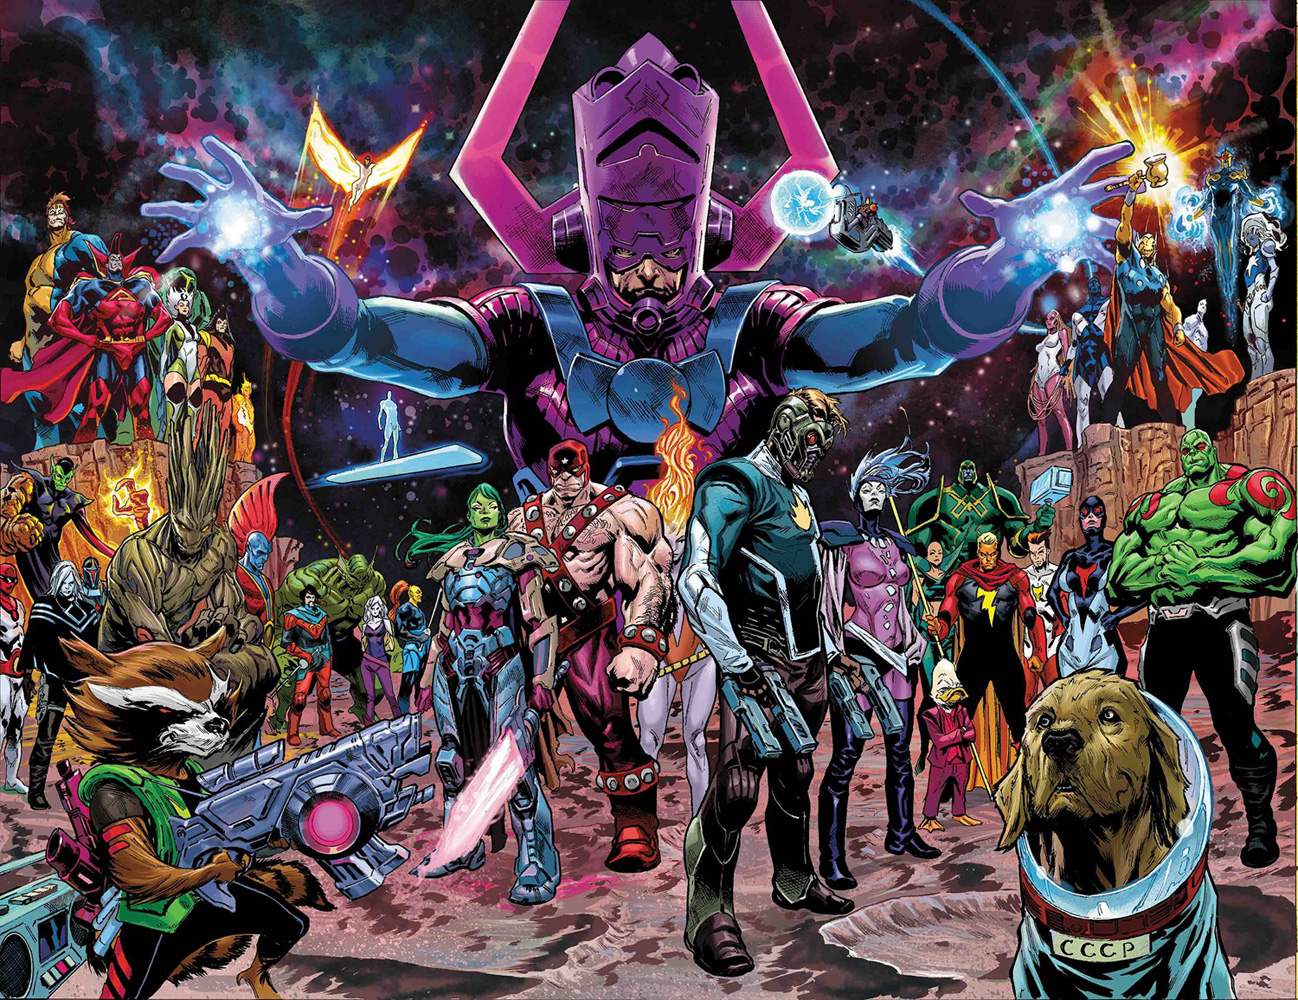 Guardians of the Galaxy #1 Wraparound cover